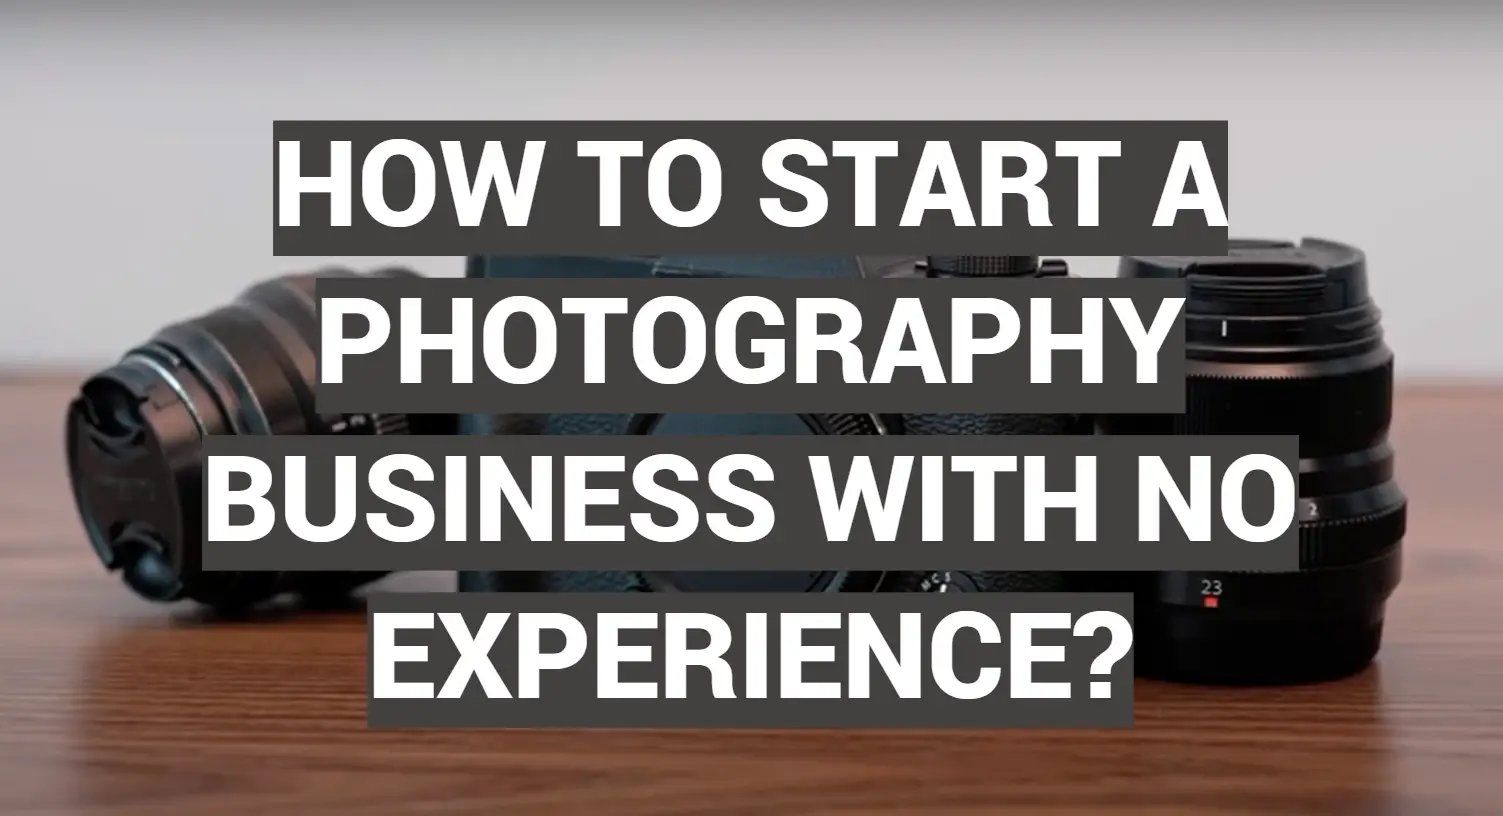 How to Start a Photography Business With No Experience?